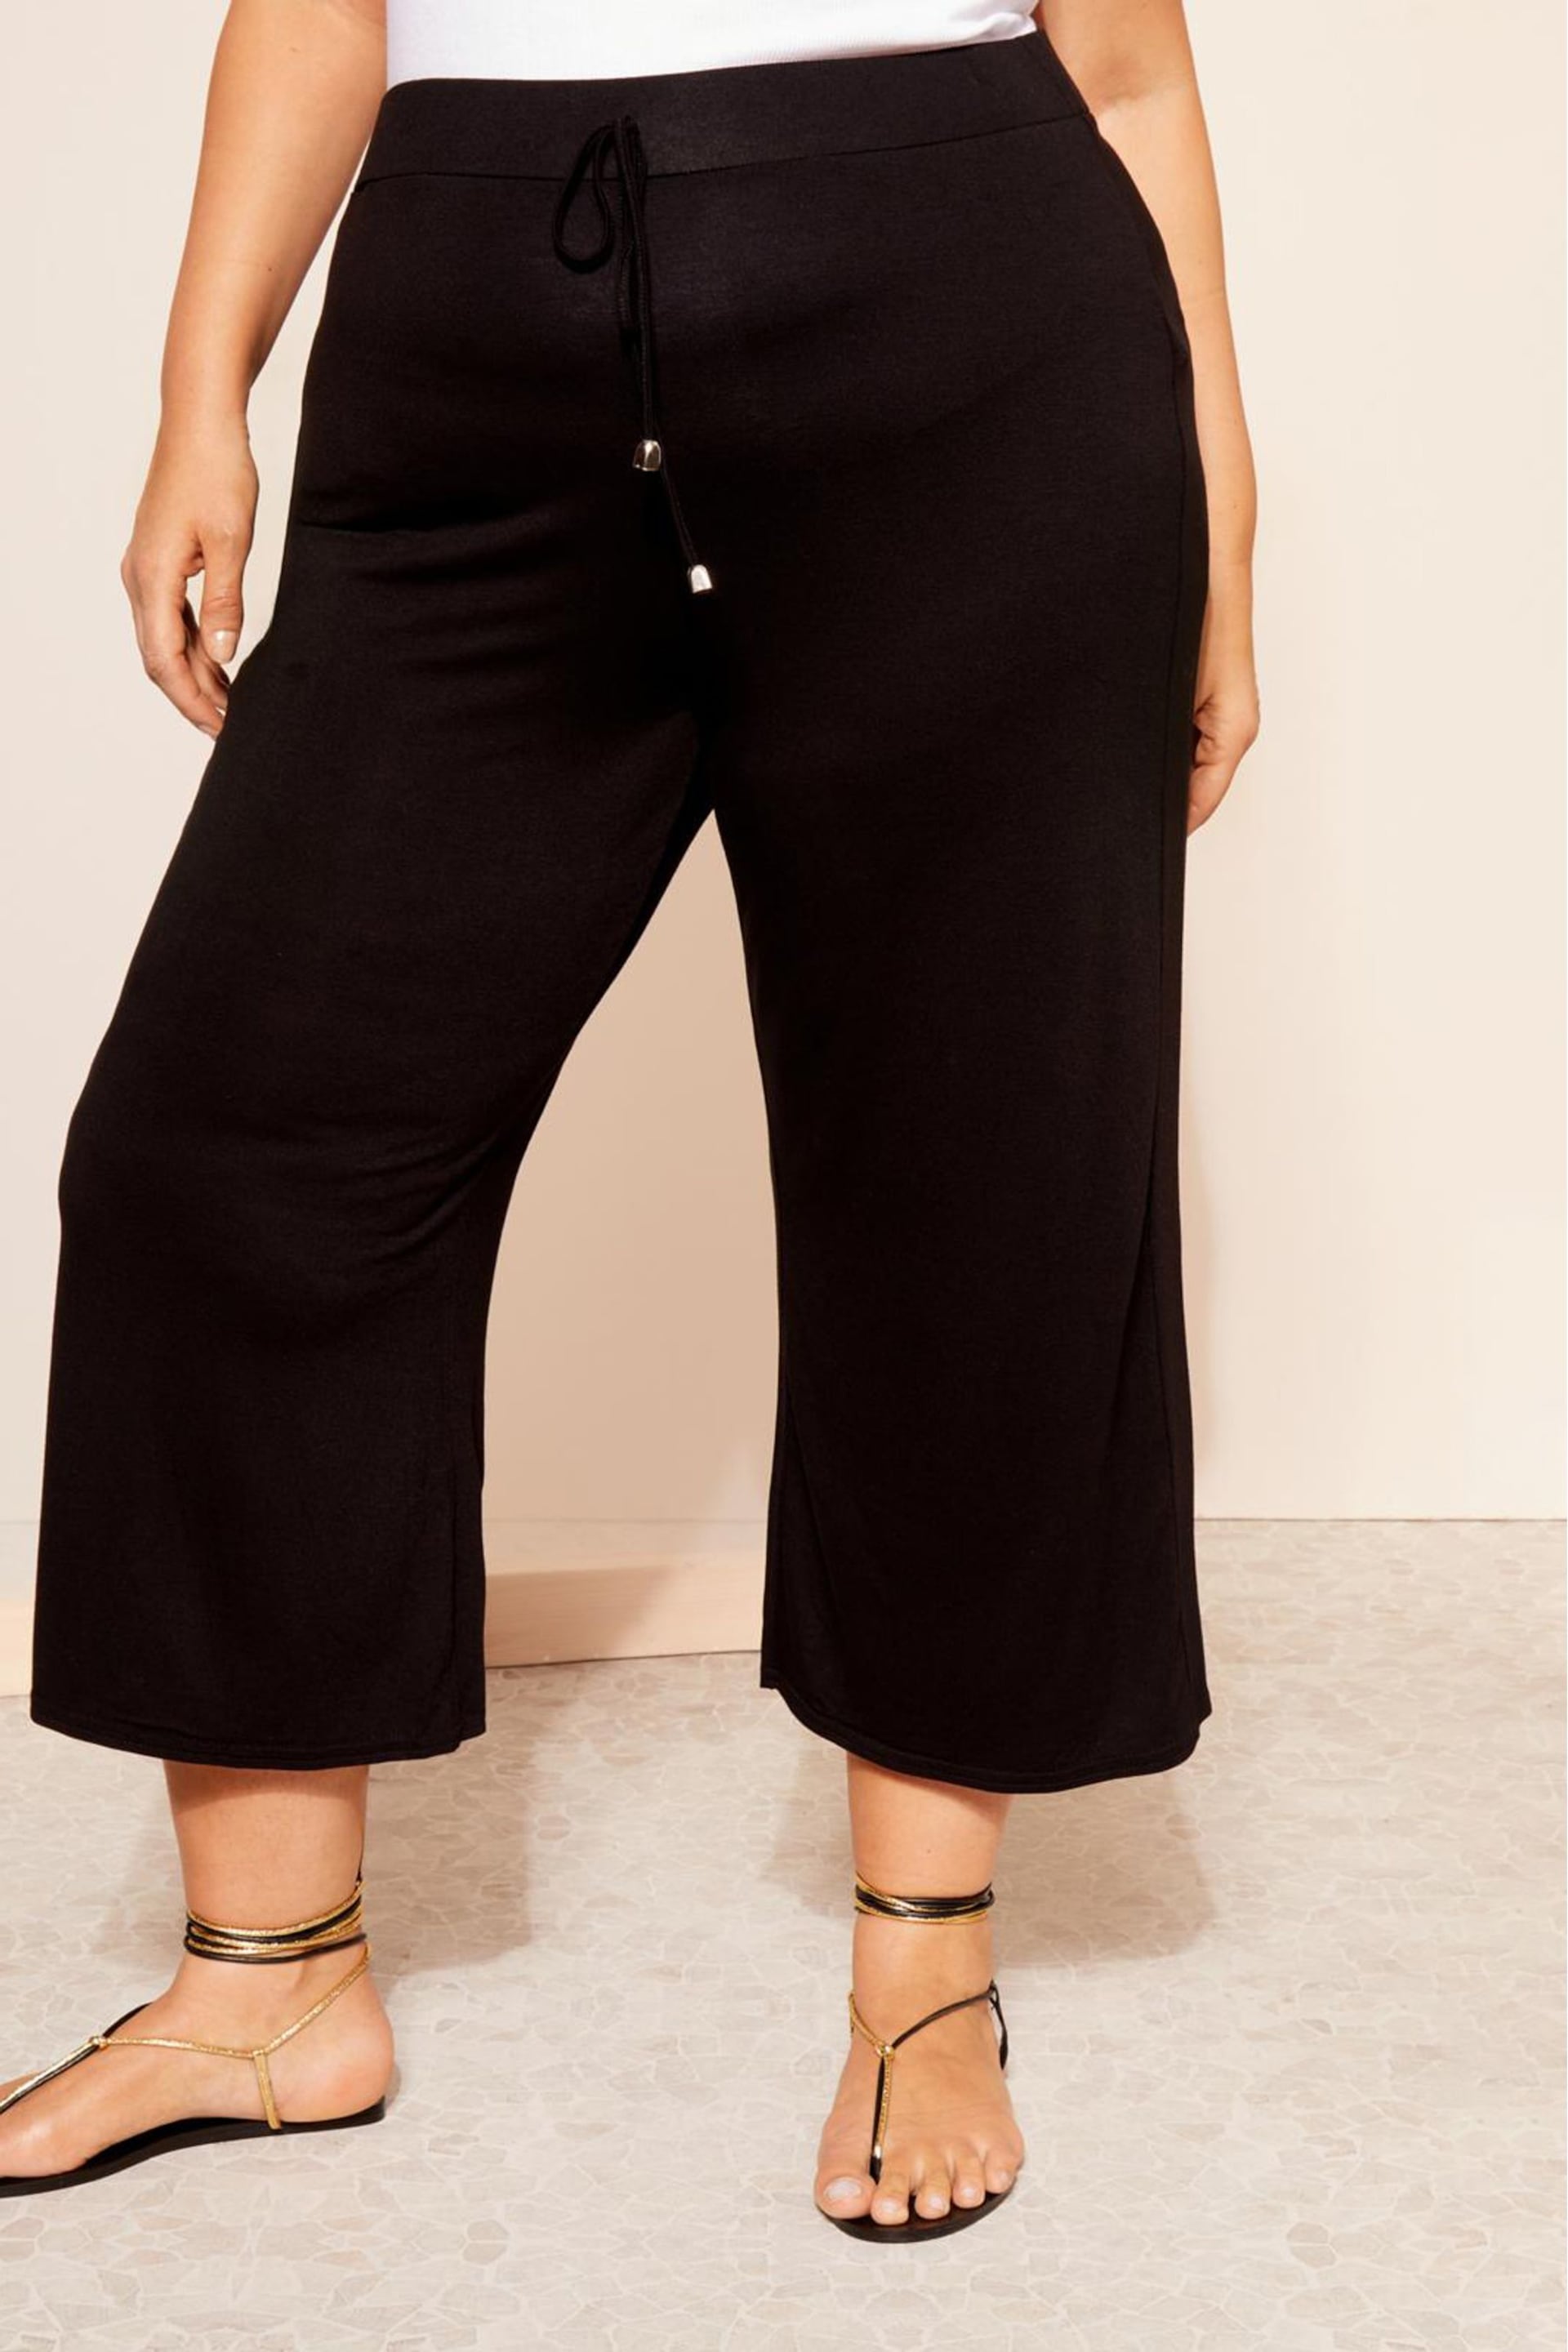 Curves Like These Black Jersey Culotte Trousers - Image 1 of 4